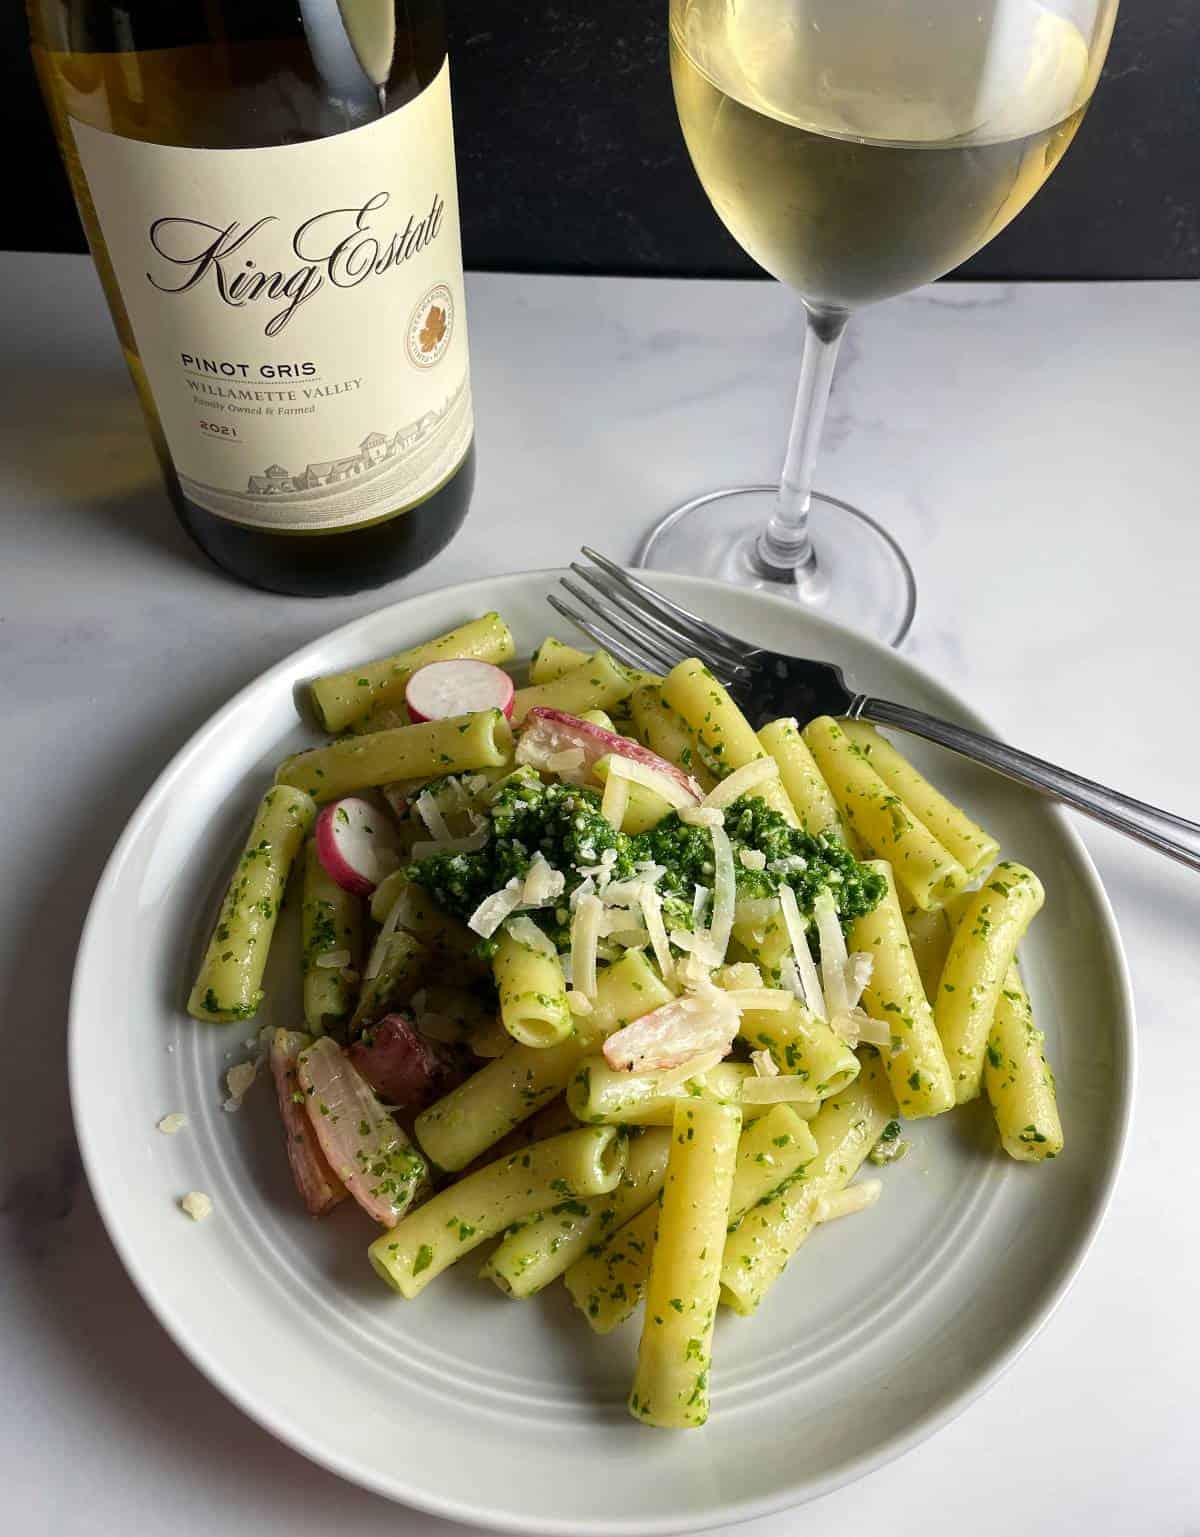 radish green pesto tossed with ziti and roasted radishes, served with a King Estate Pinot Gris wine.